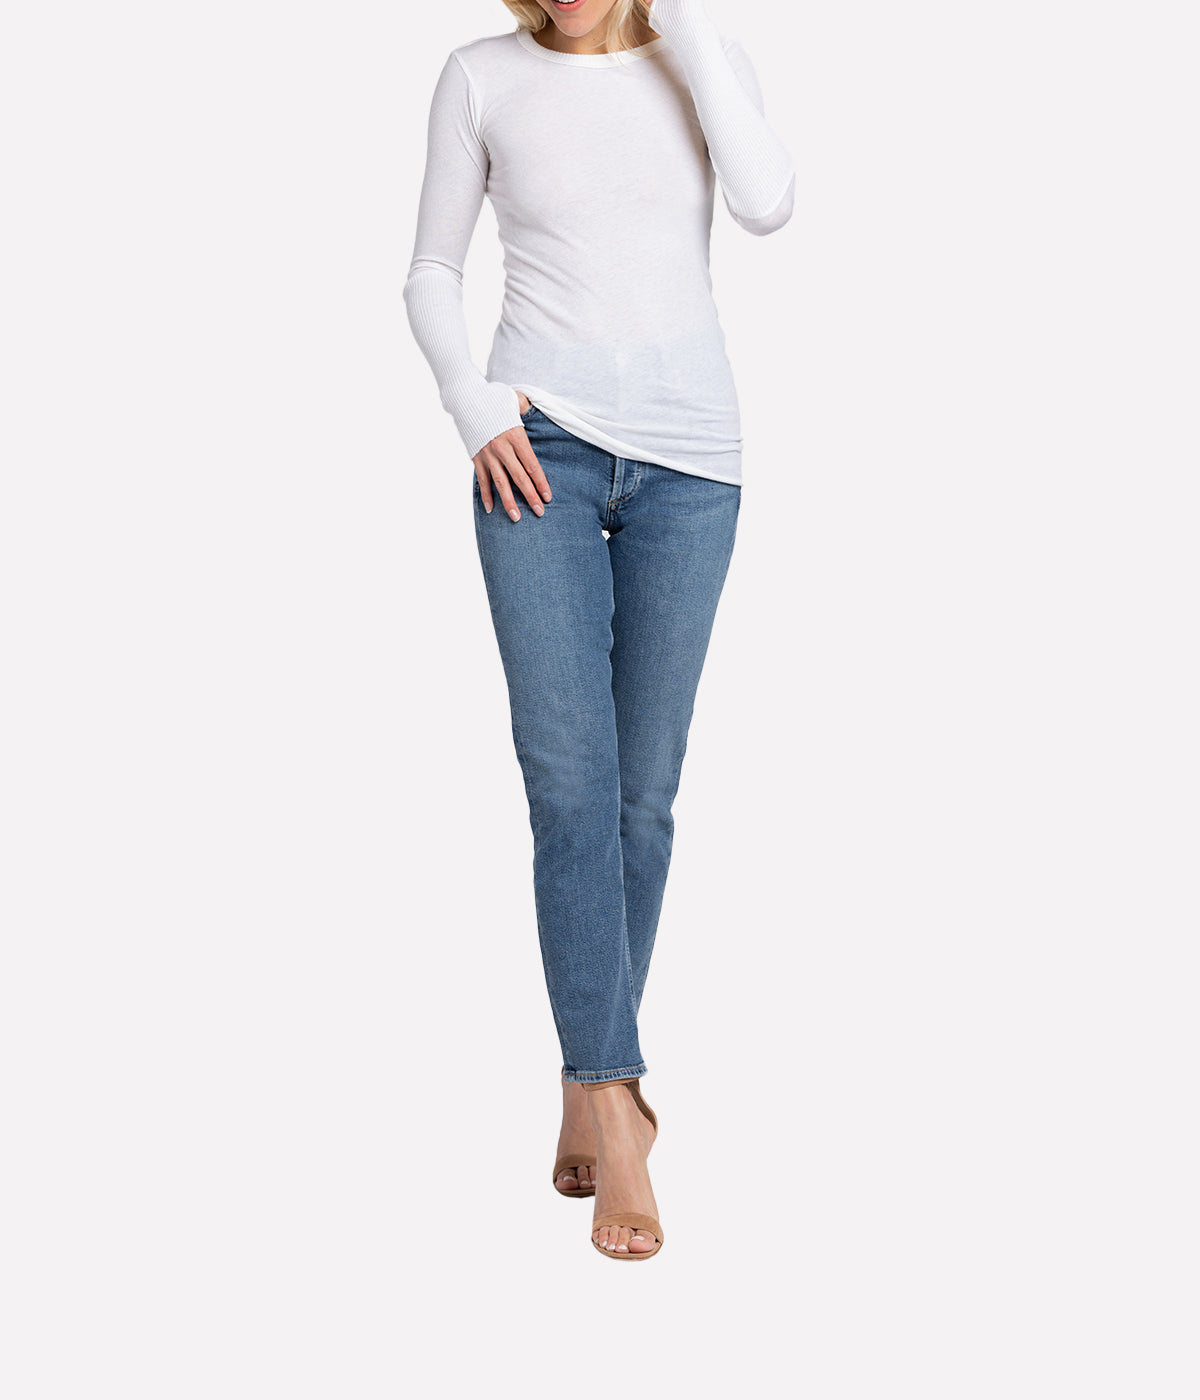 Cashmere Crew Neck Fitted Long Sleeve Top in White